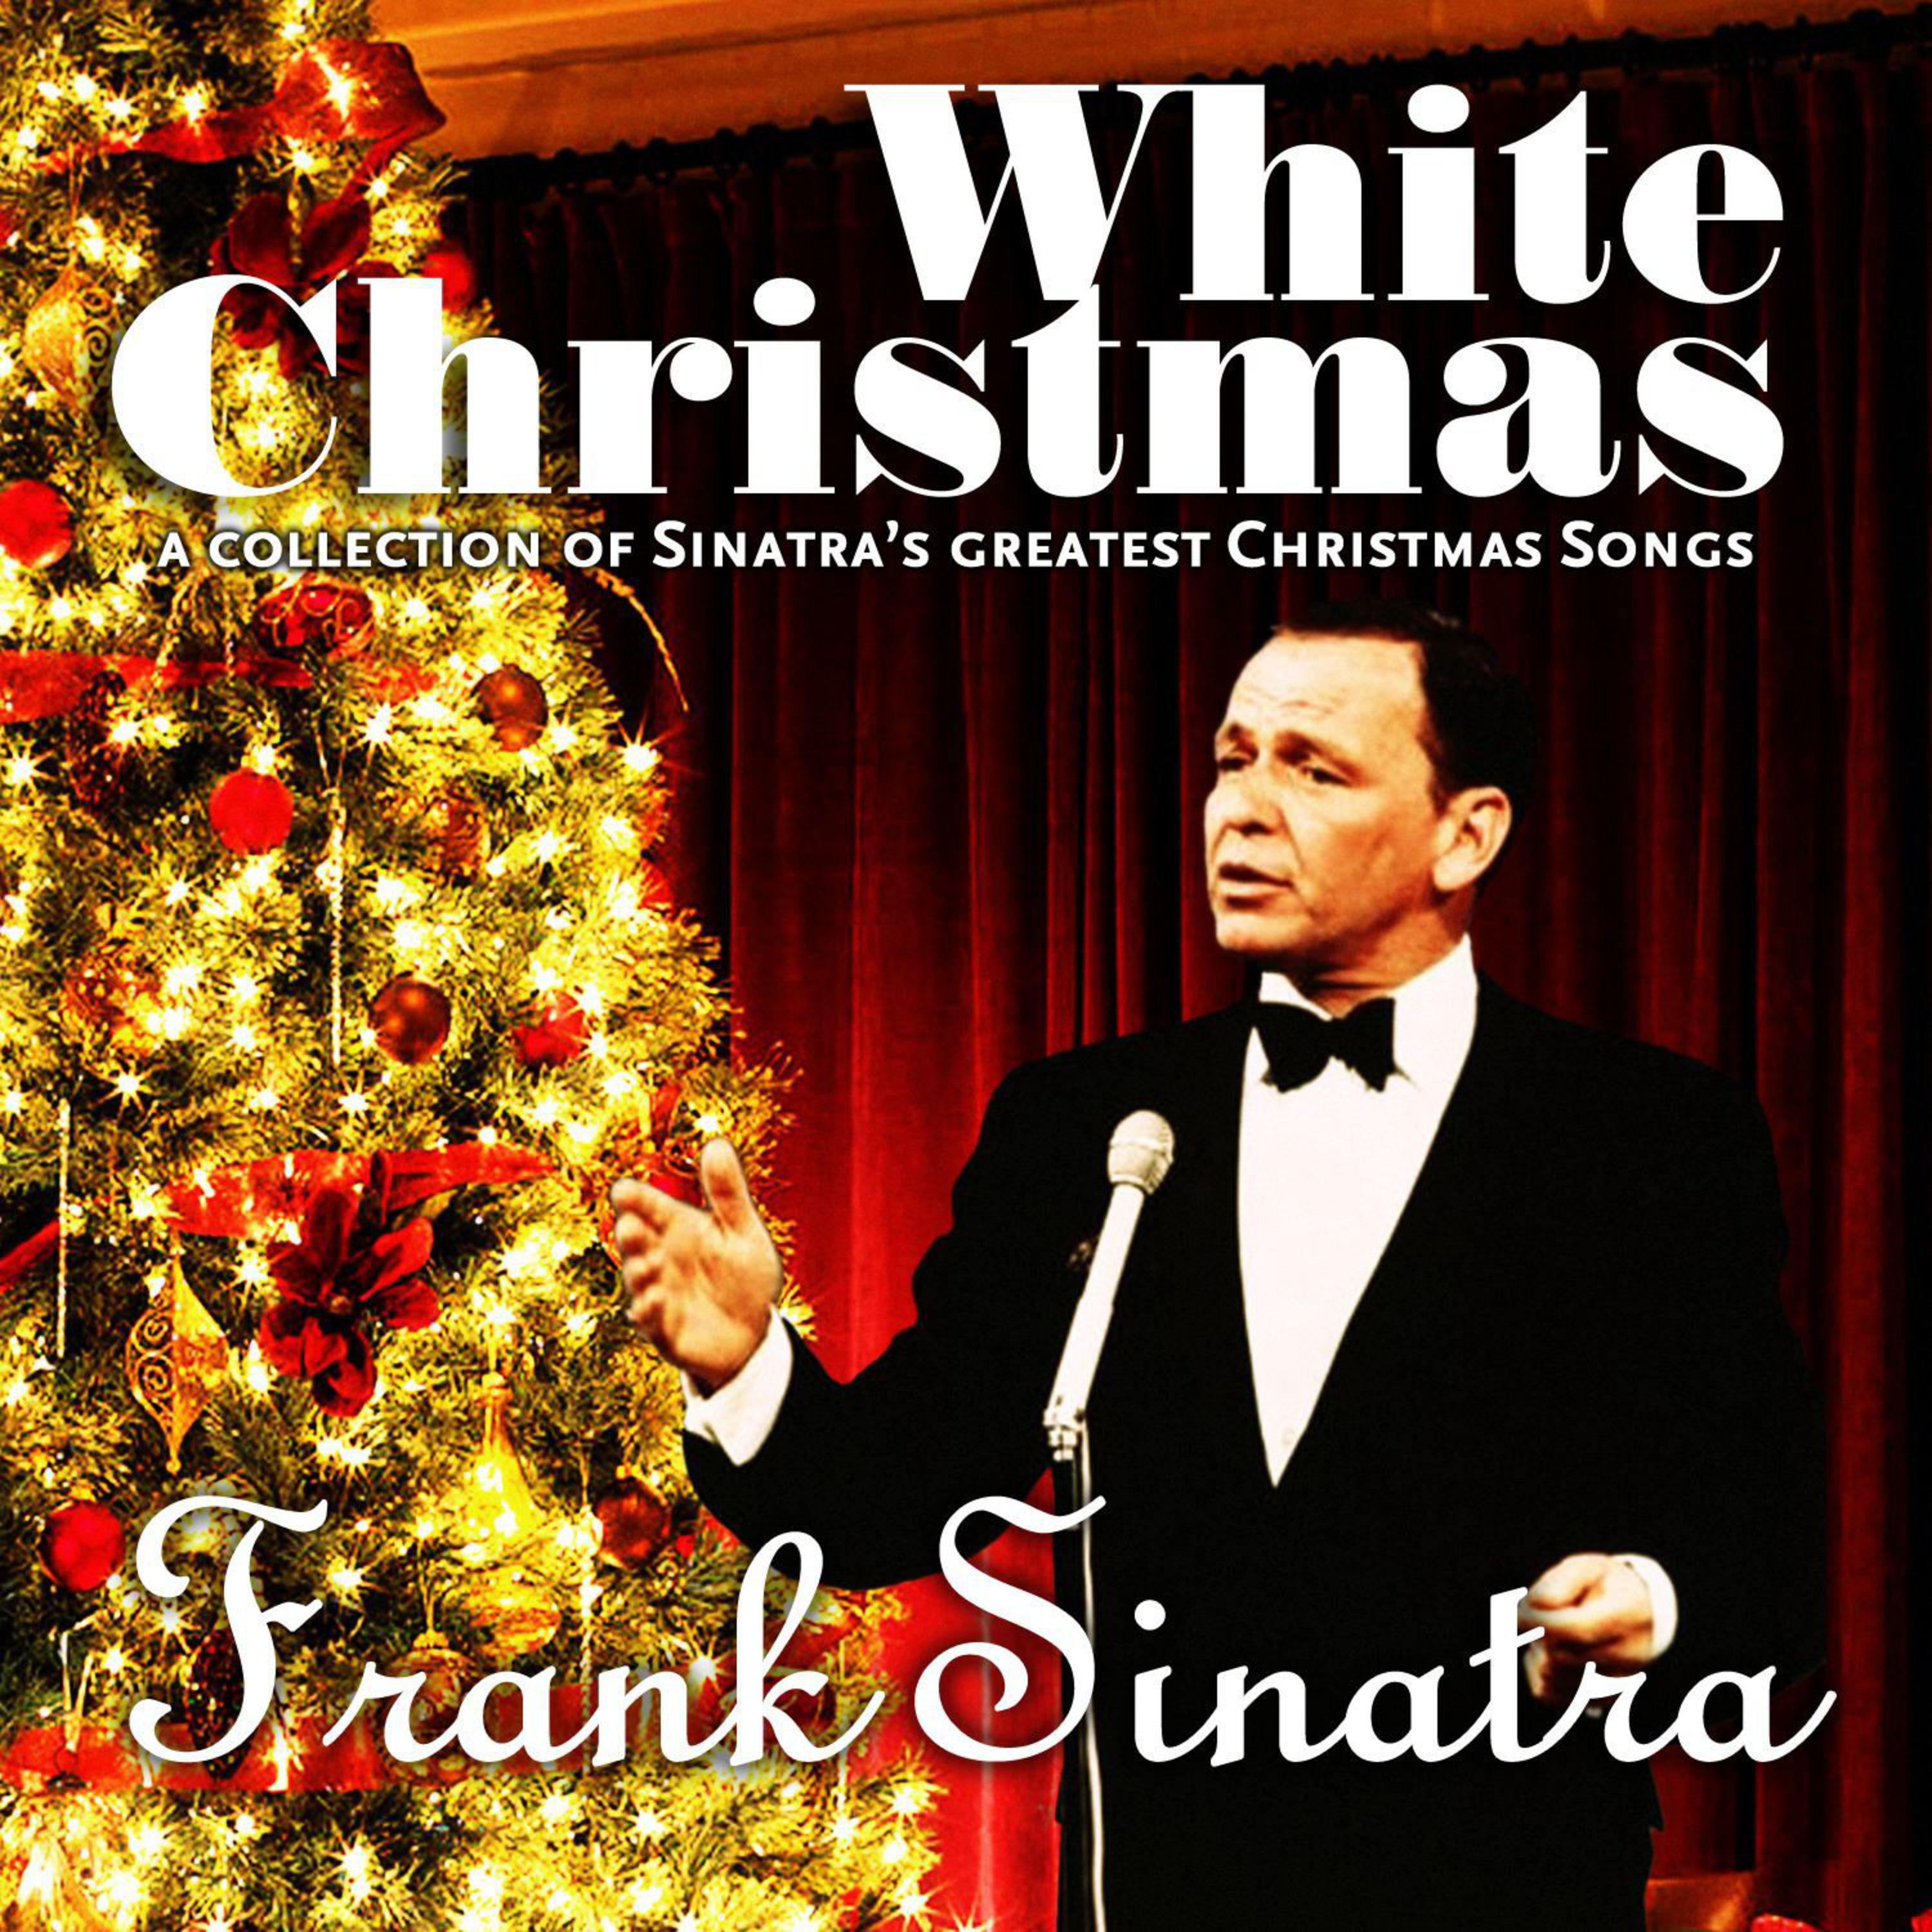 White Christmas (A Collection of Sinatra's Greatest Christmas Songs)